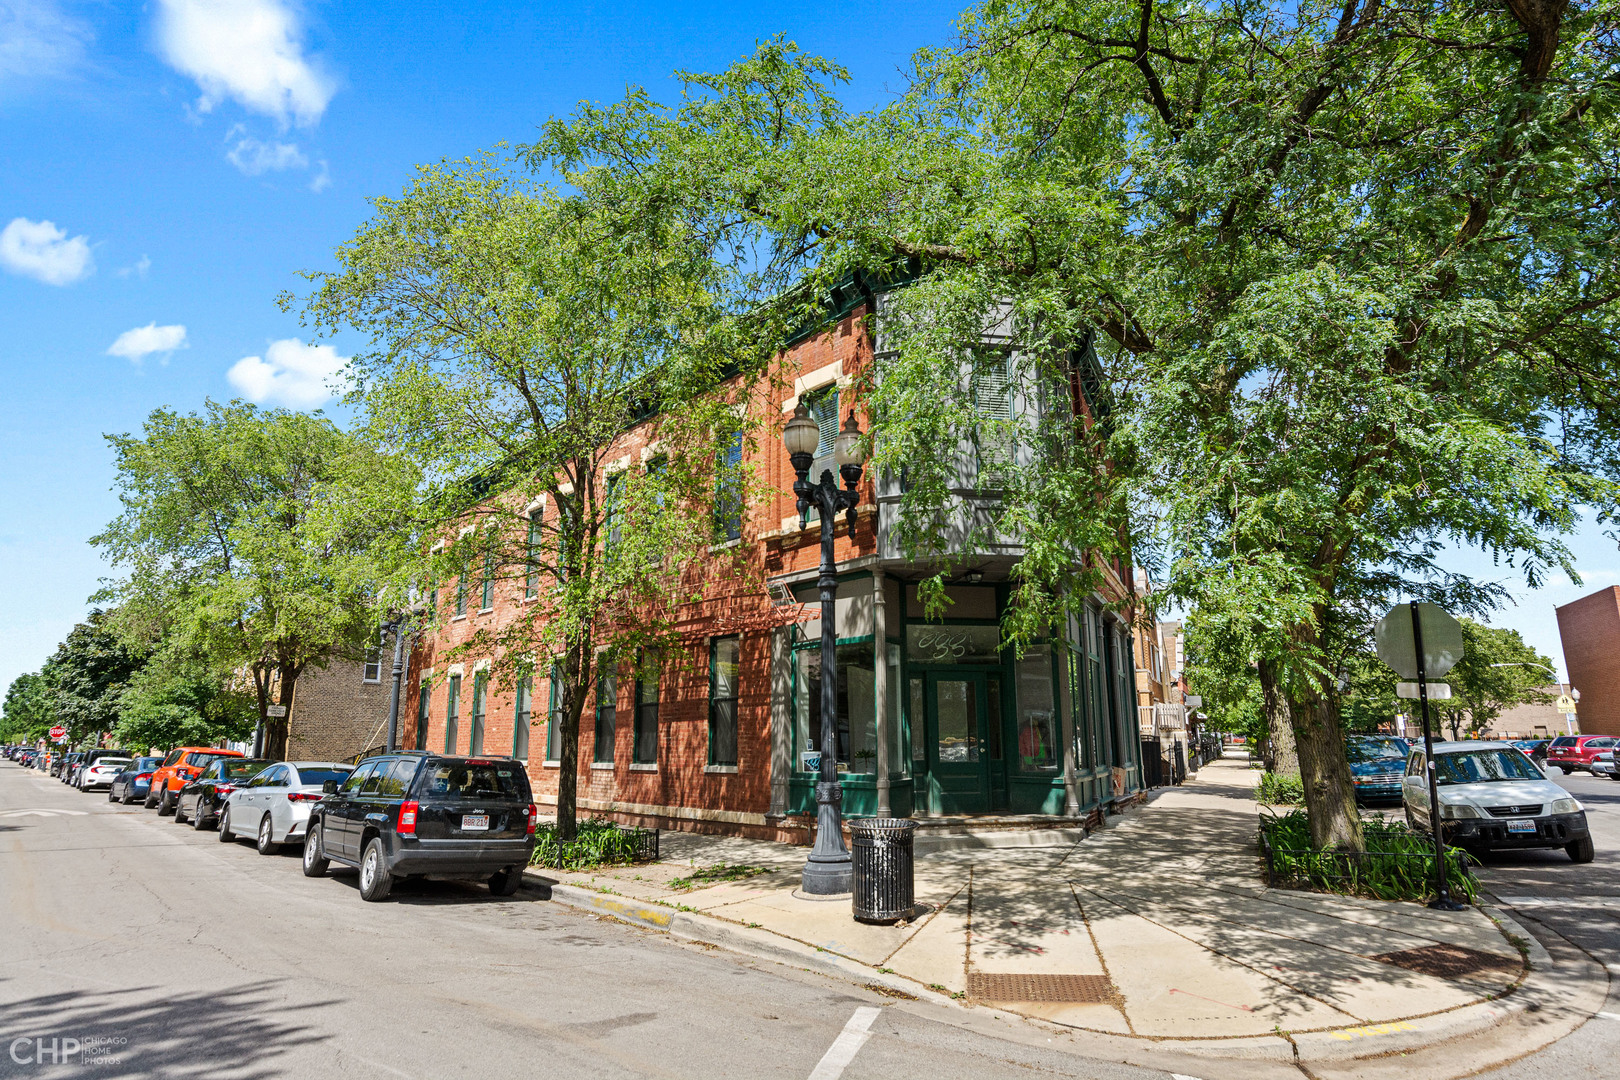 2451 S Oakley Ave, Chicago, IL 60608 - MLS 10999758 - Coldwell Banker